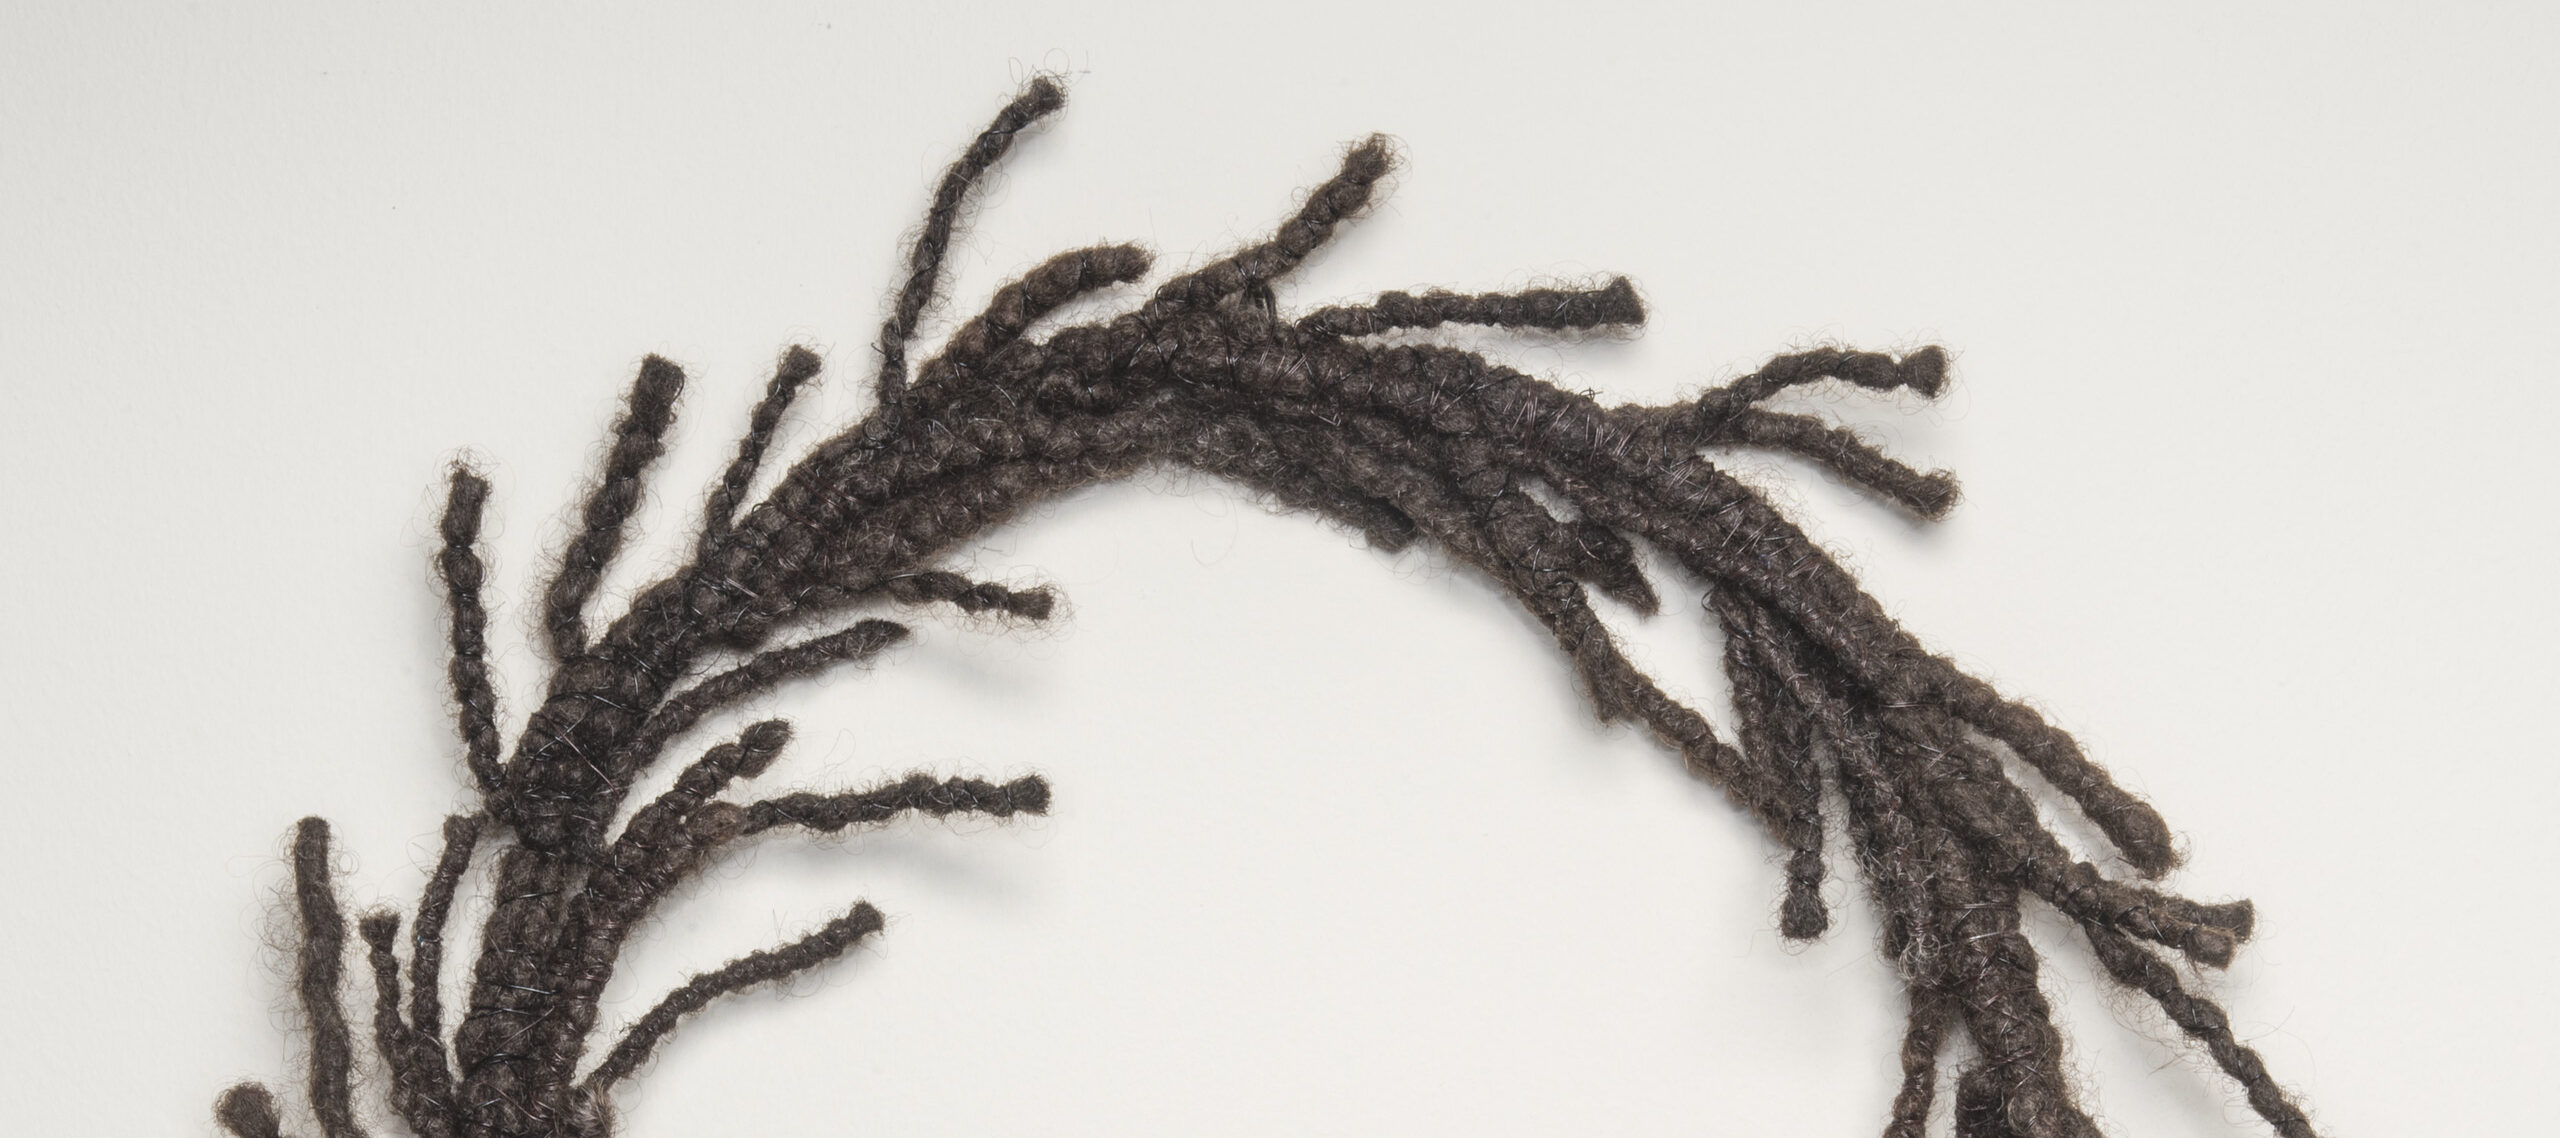 A circular wreath made of dark, tightly coiled hair with strands escaping and resembling laurels.